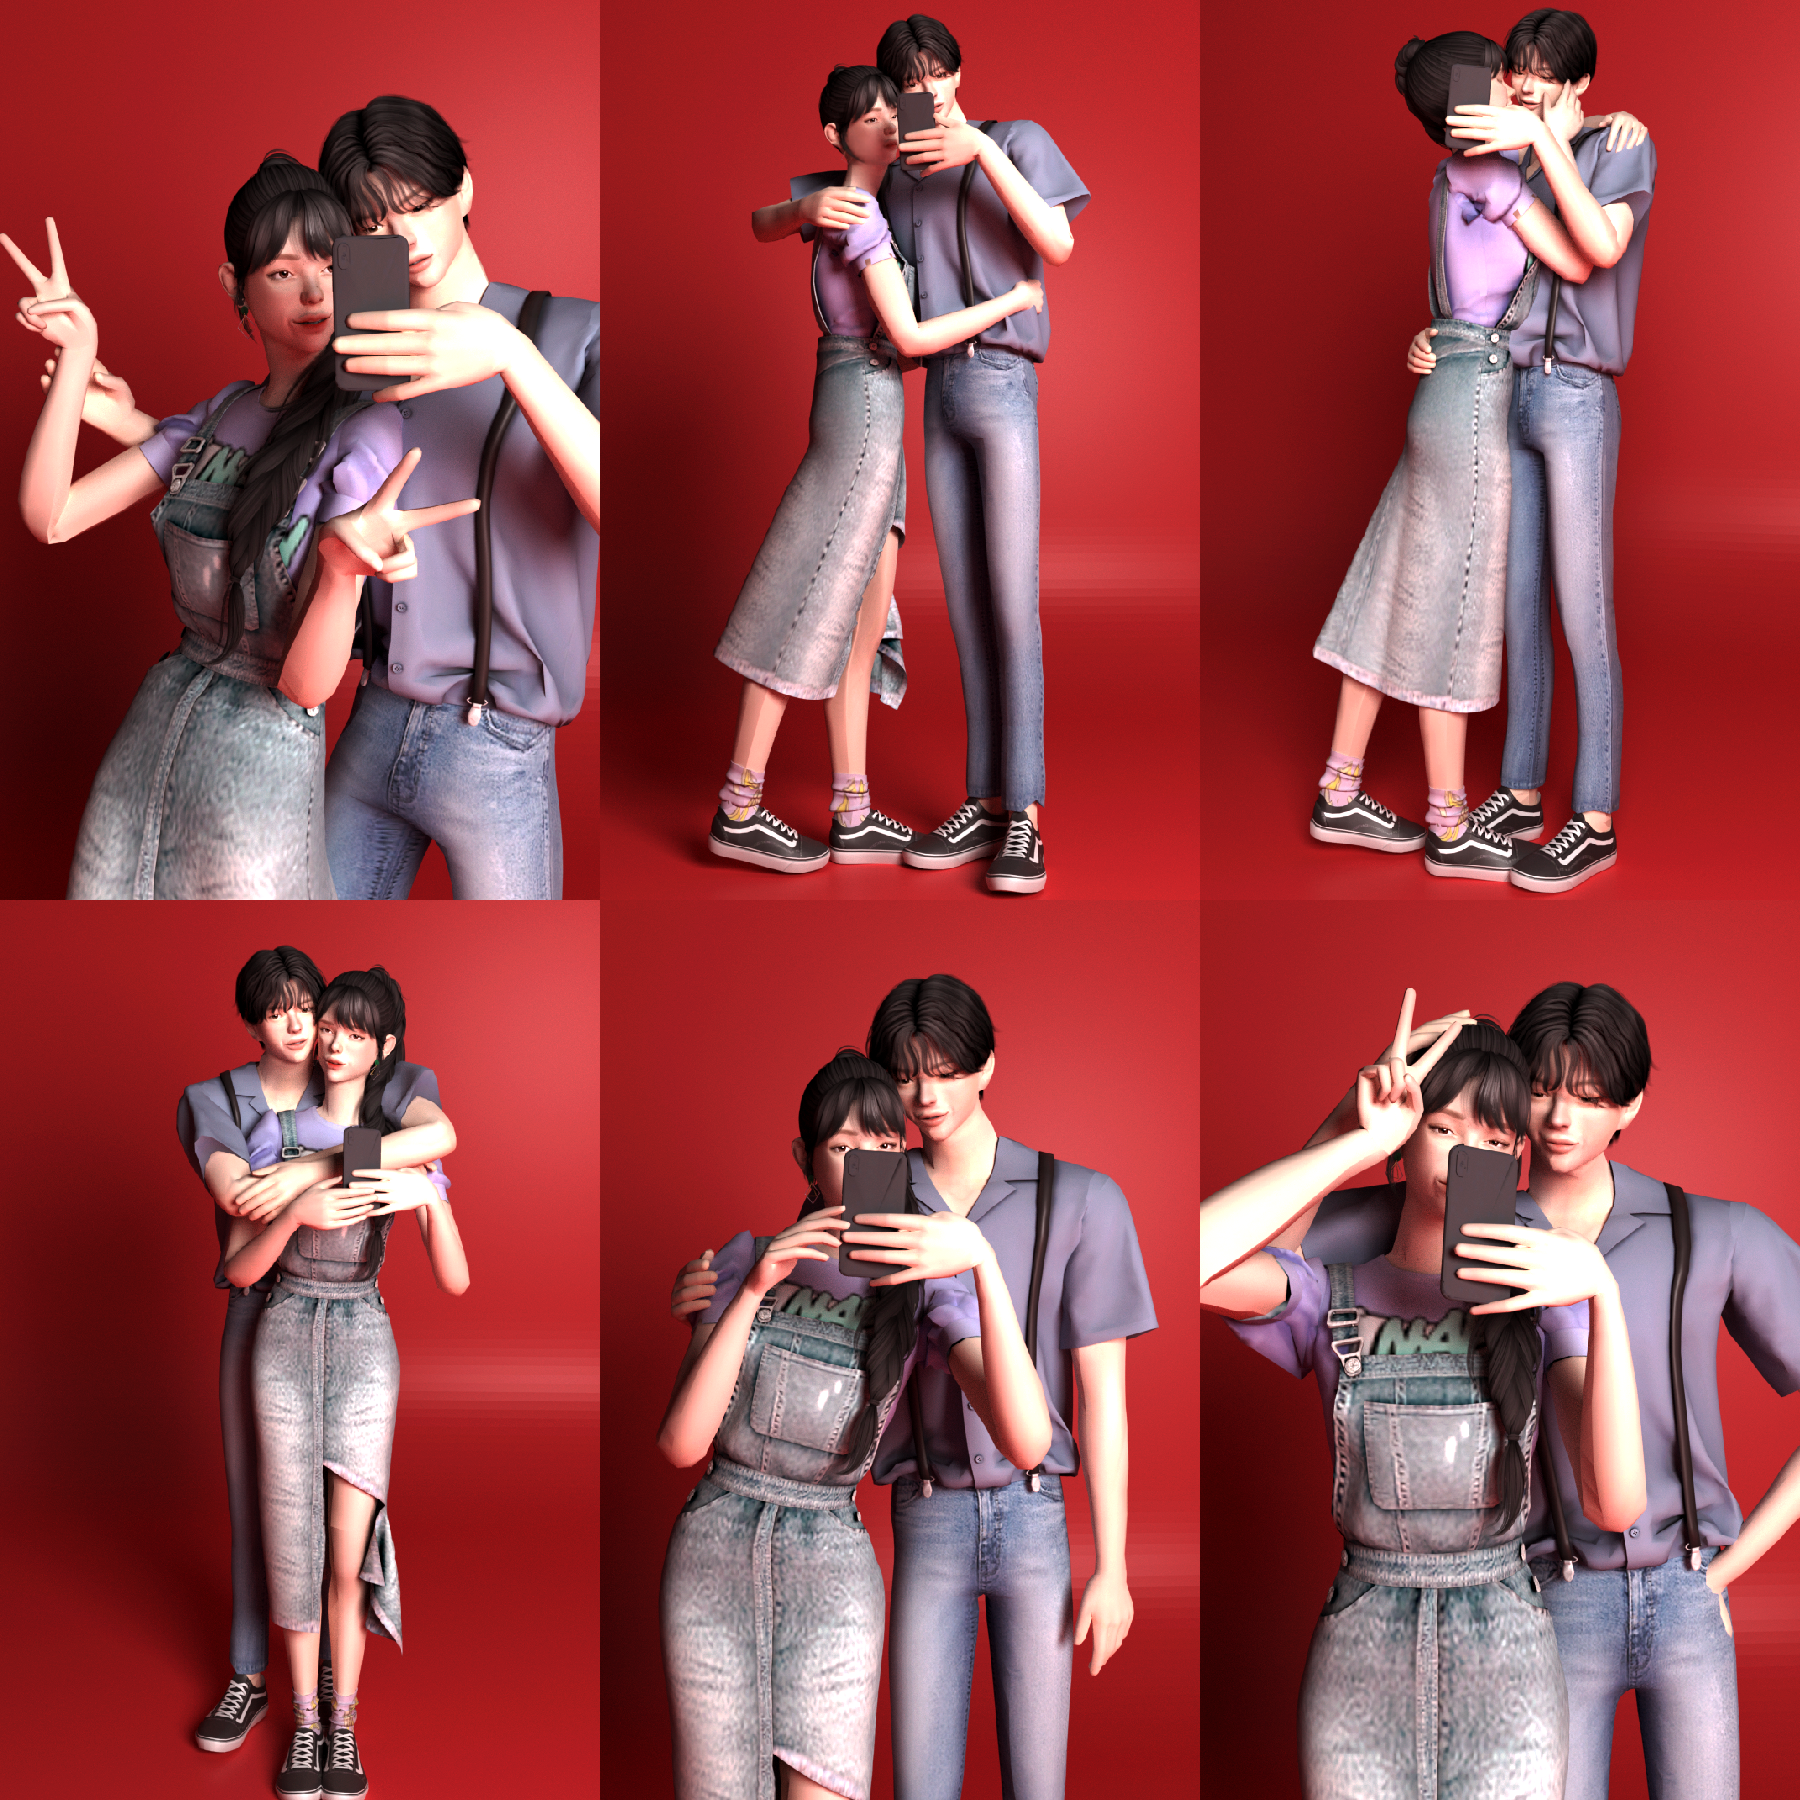 SweetSorrowSims - The Sims 4 Custom Content - Selfie Pose Pack Ver 2 -  YouTube